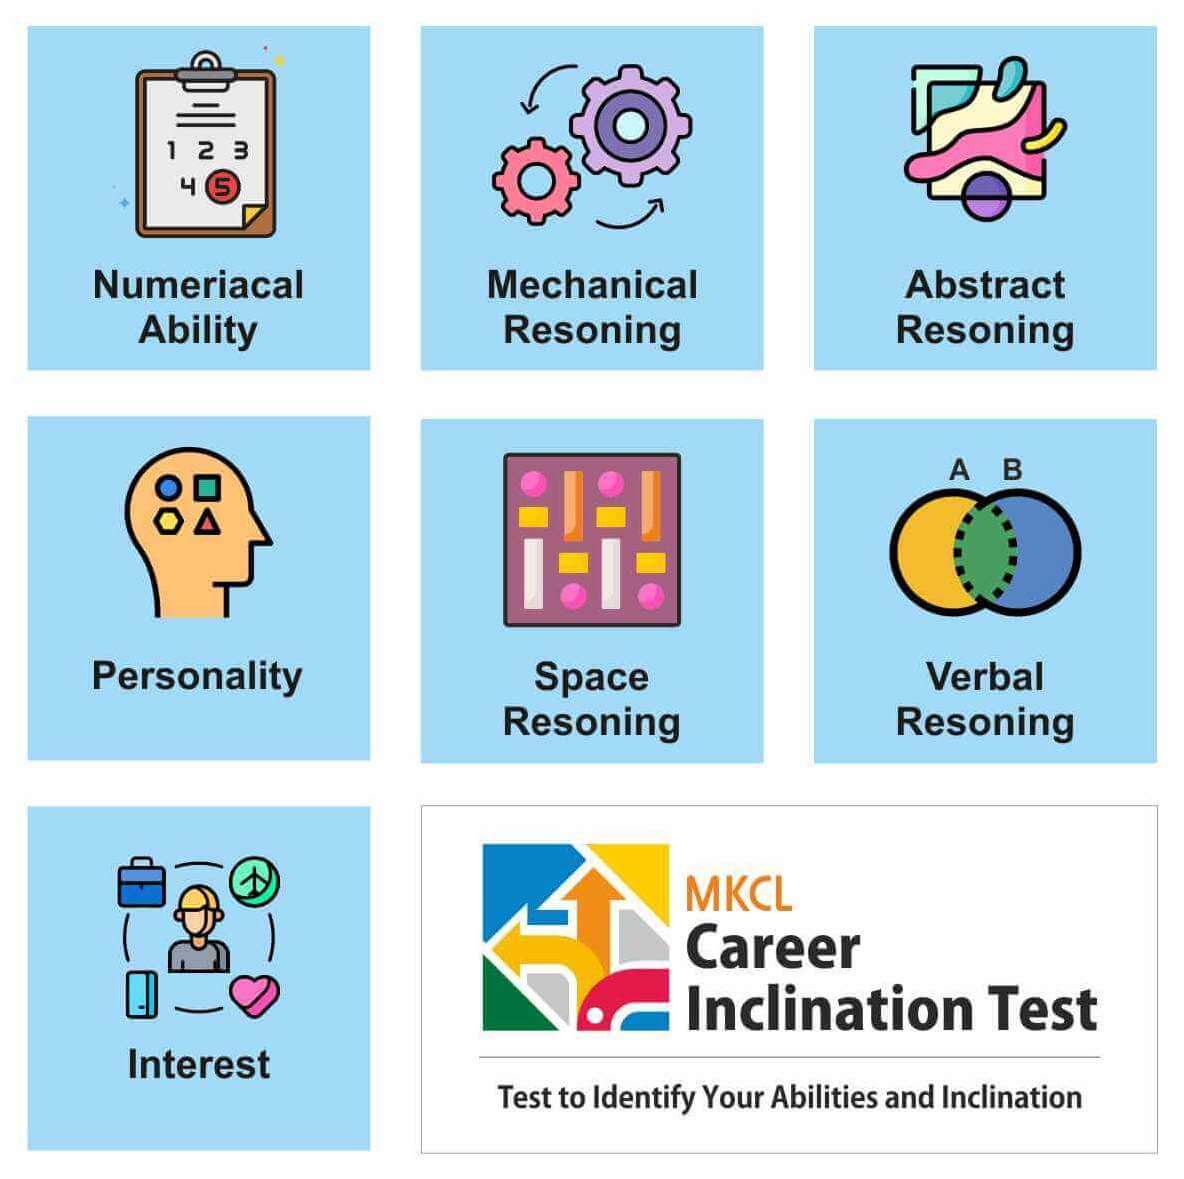 About Career Inclination Test